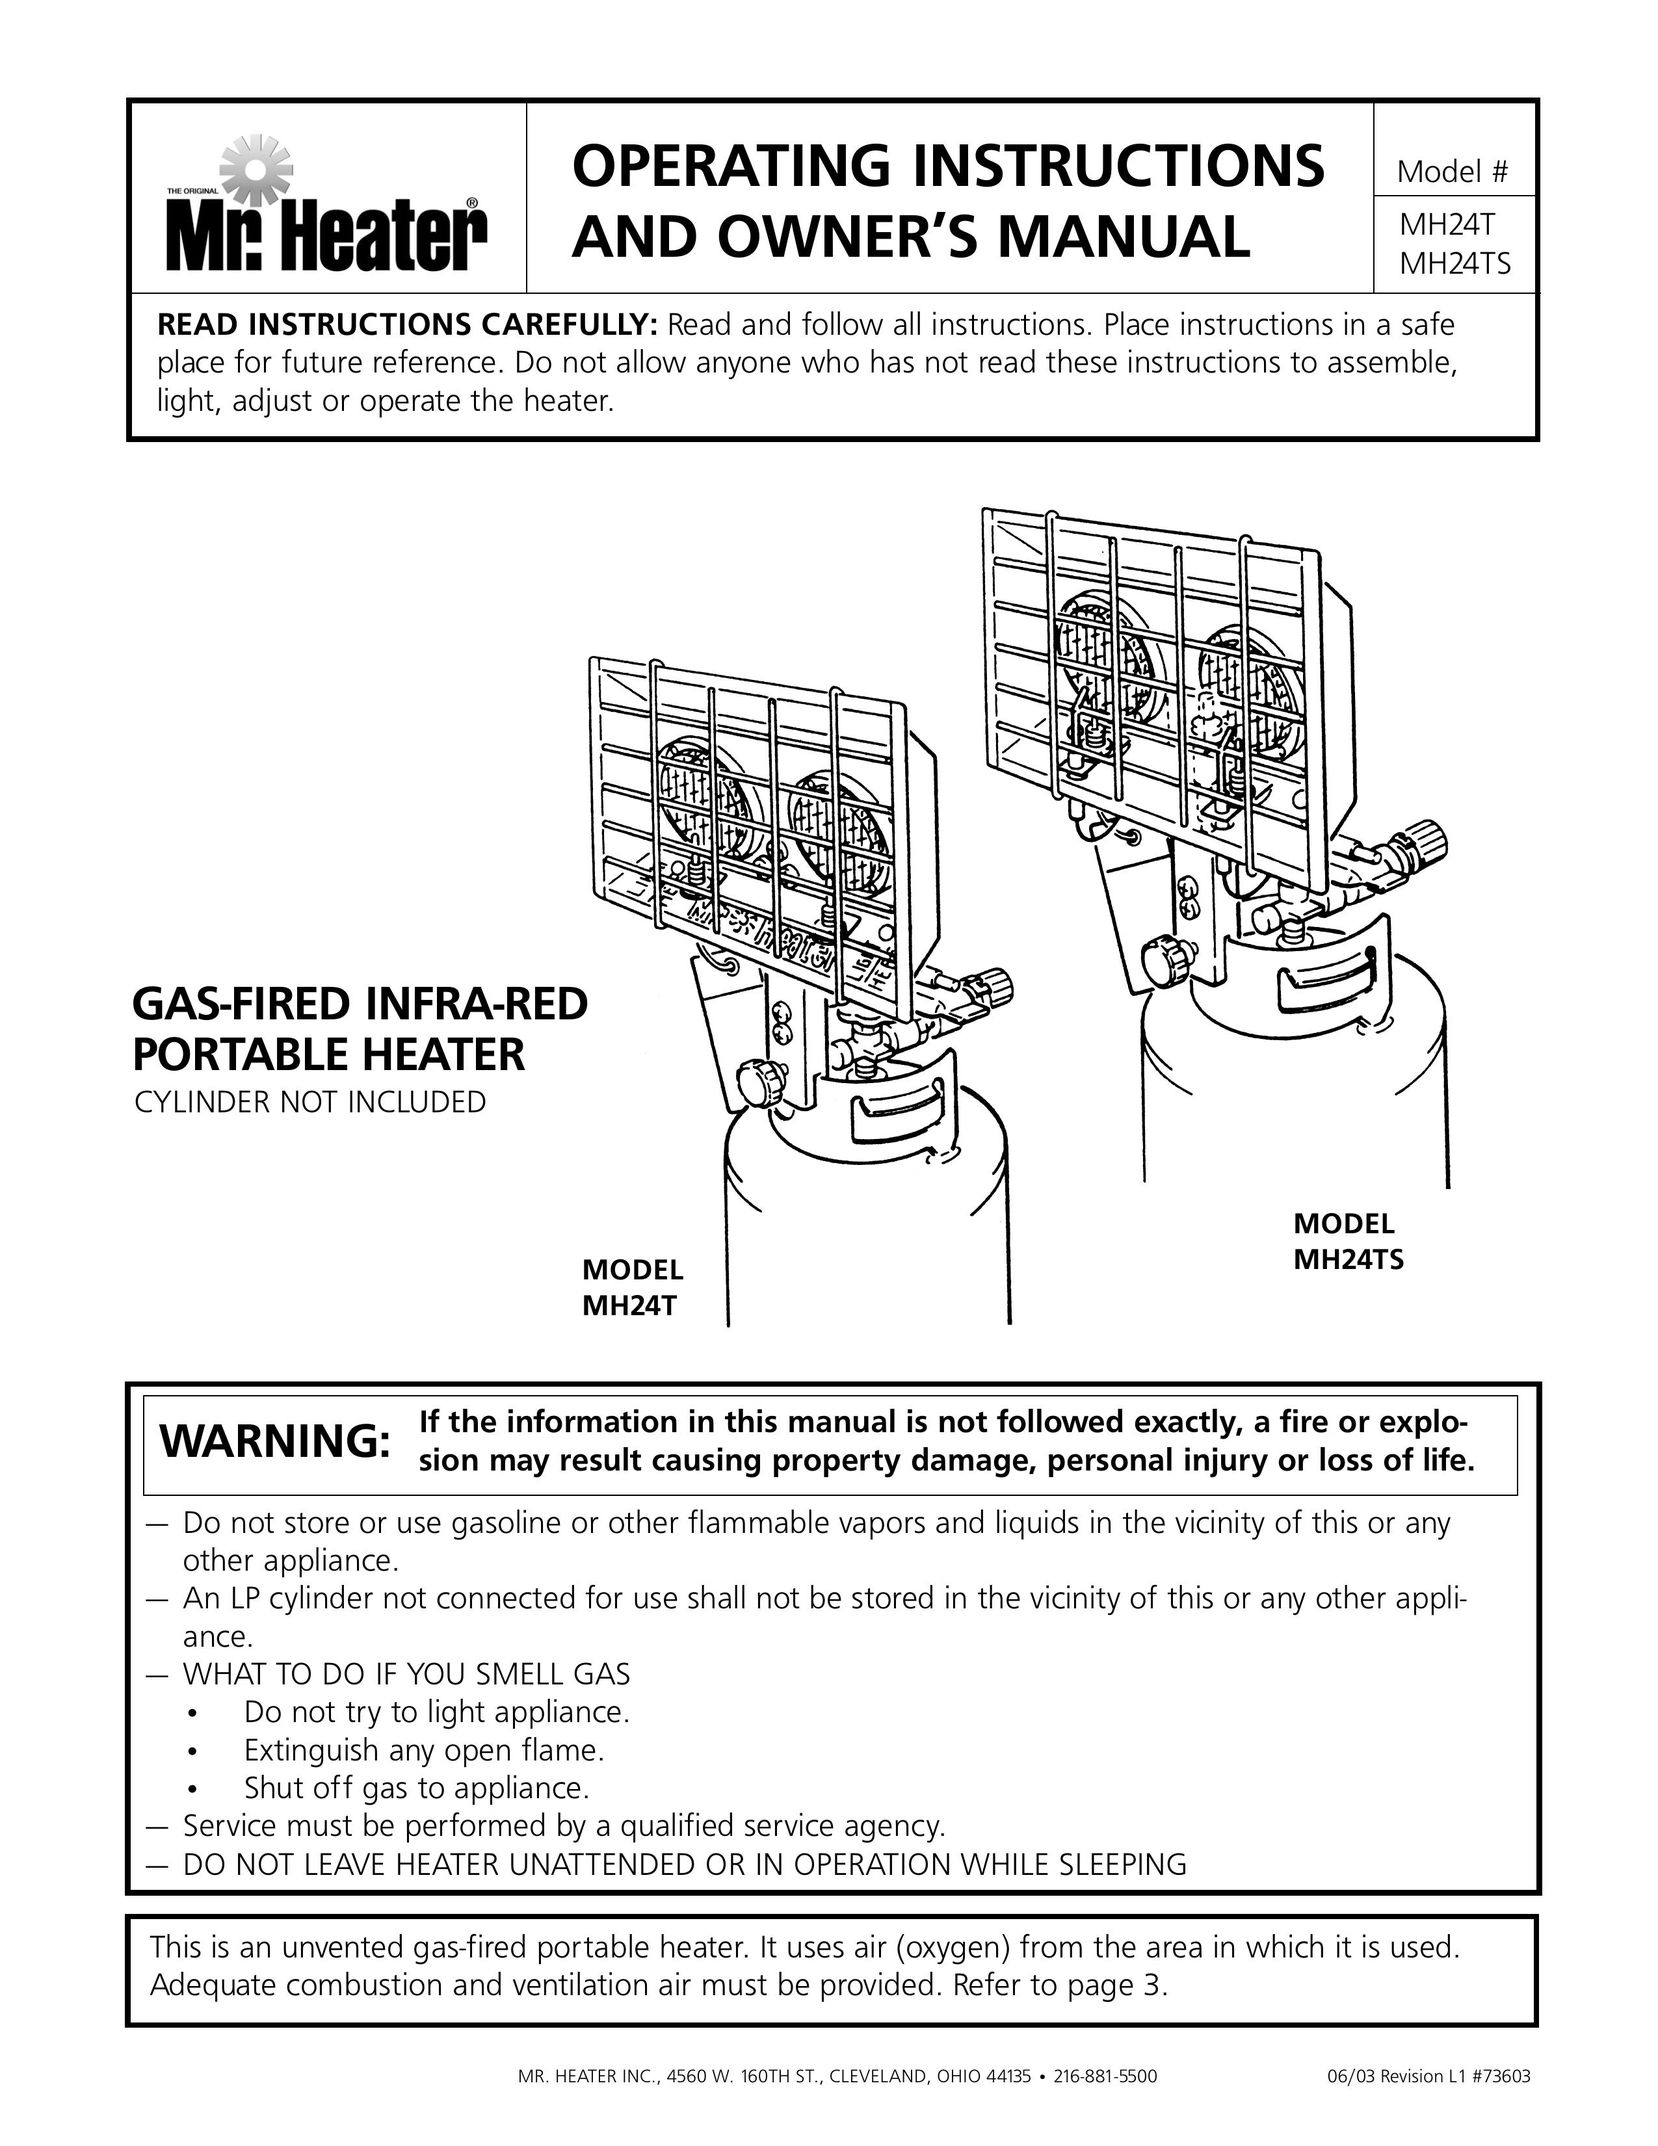 Enerco MH24T Electric Heater User Manual